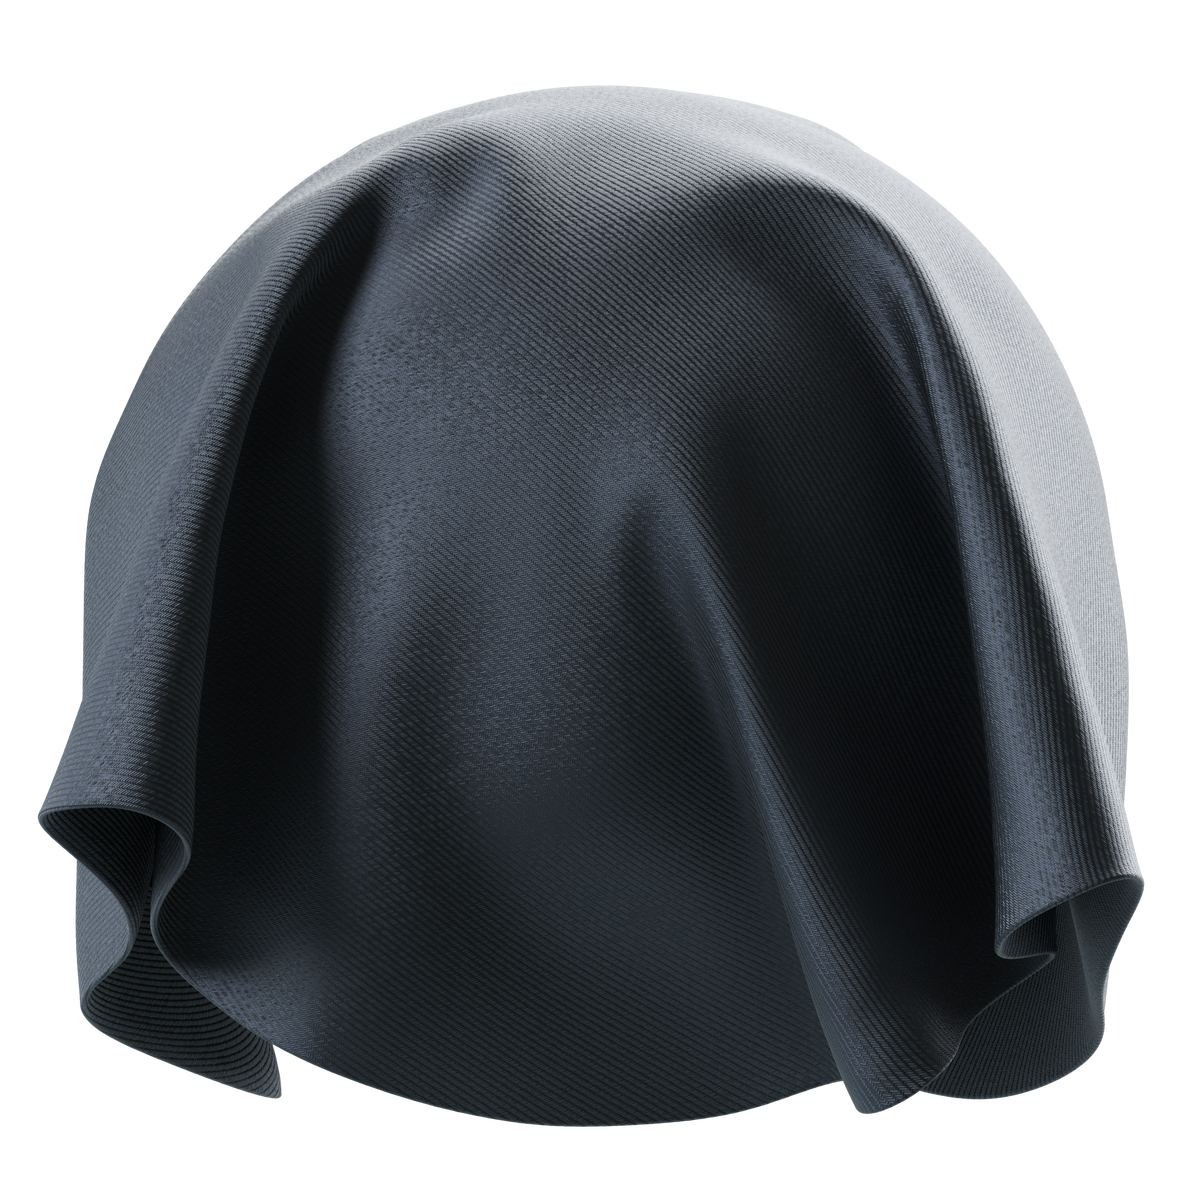 Satin Fabric on Substance 3D Assets